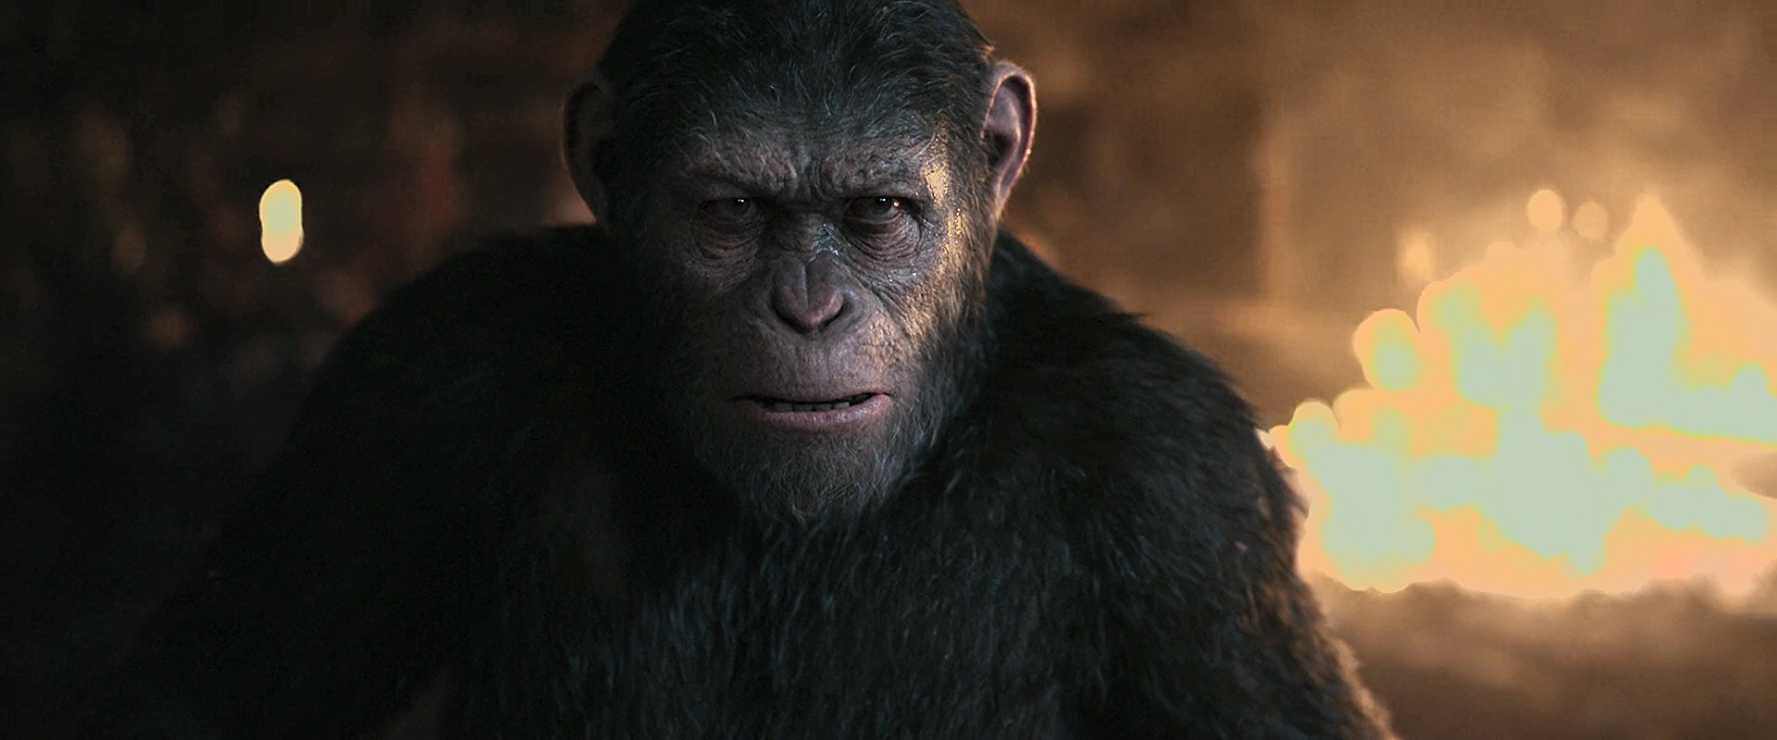 dawn of the planet of the apes 2017 dual audio 720p